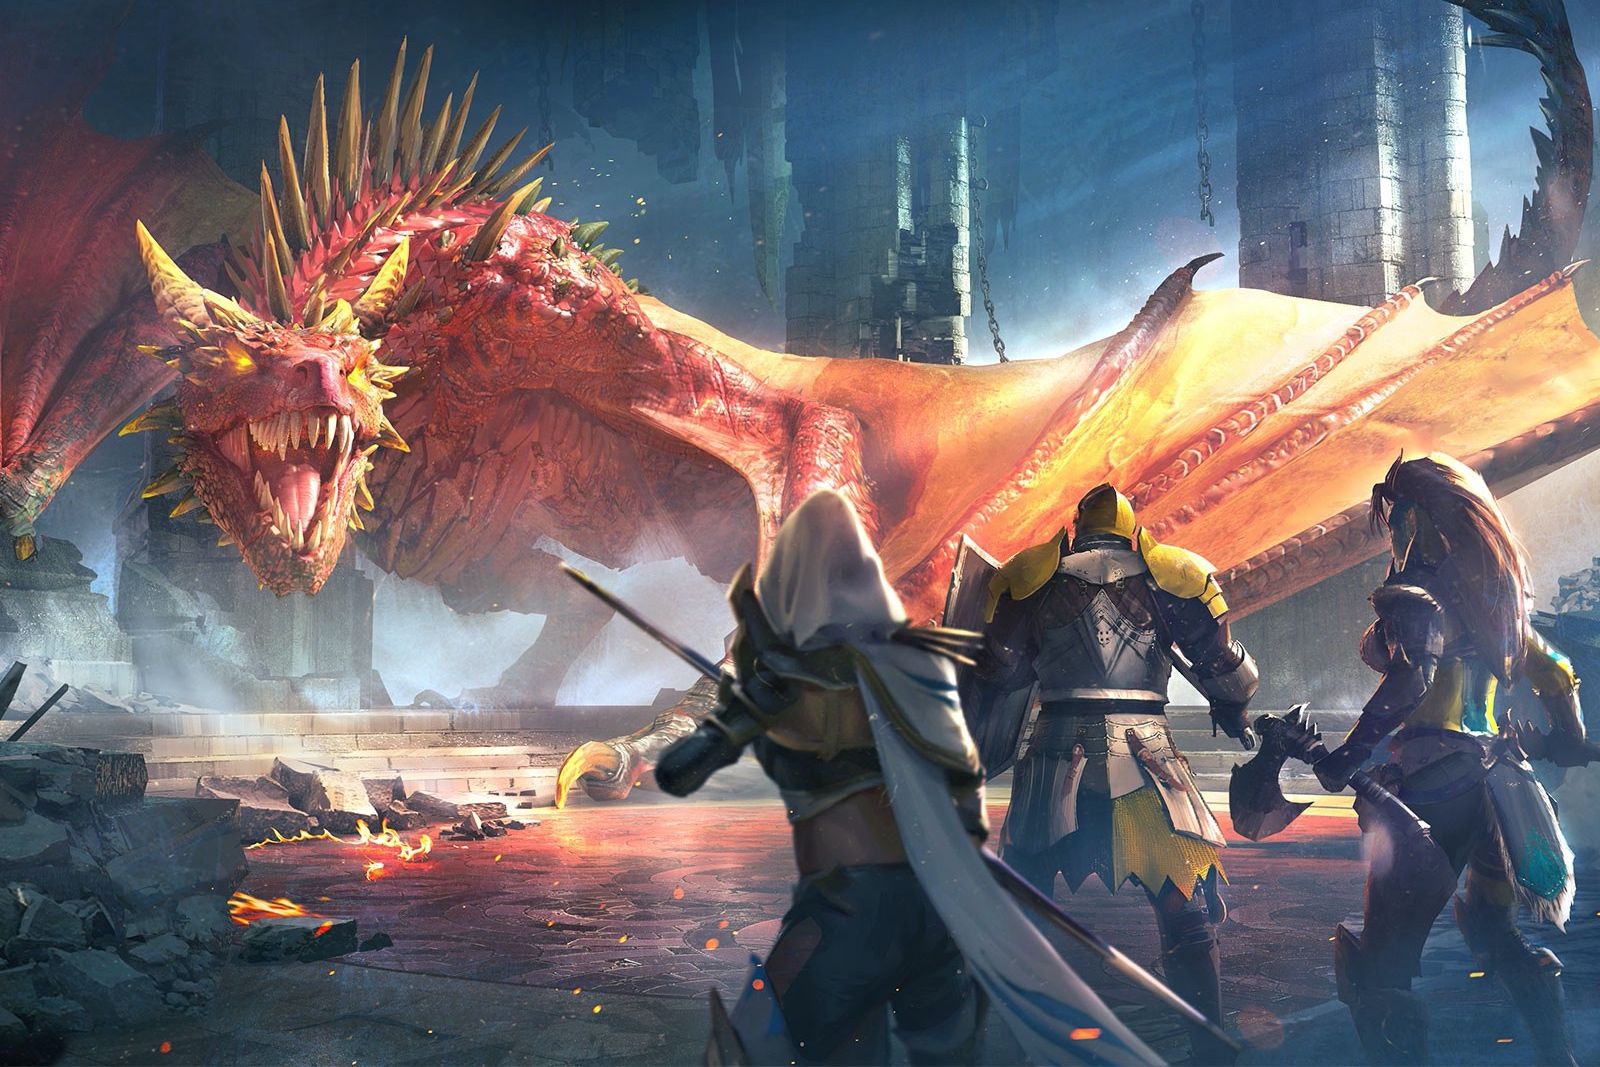 8 of the top RPG mobile games to spend time playing during lockdown photo 1